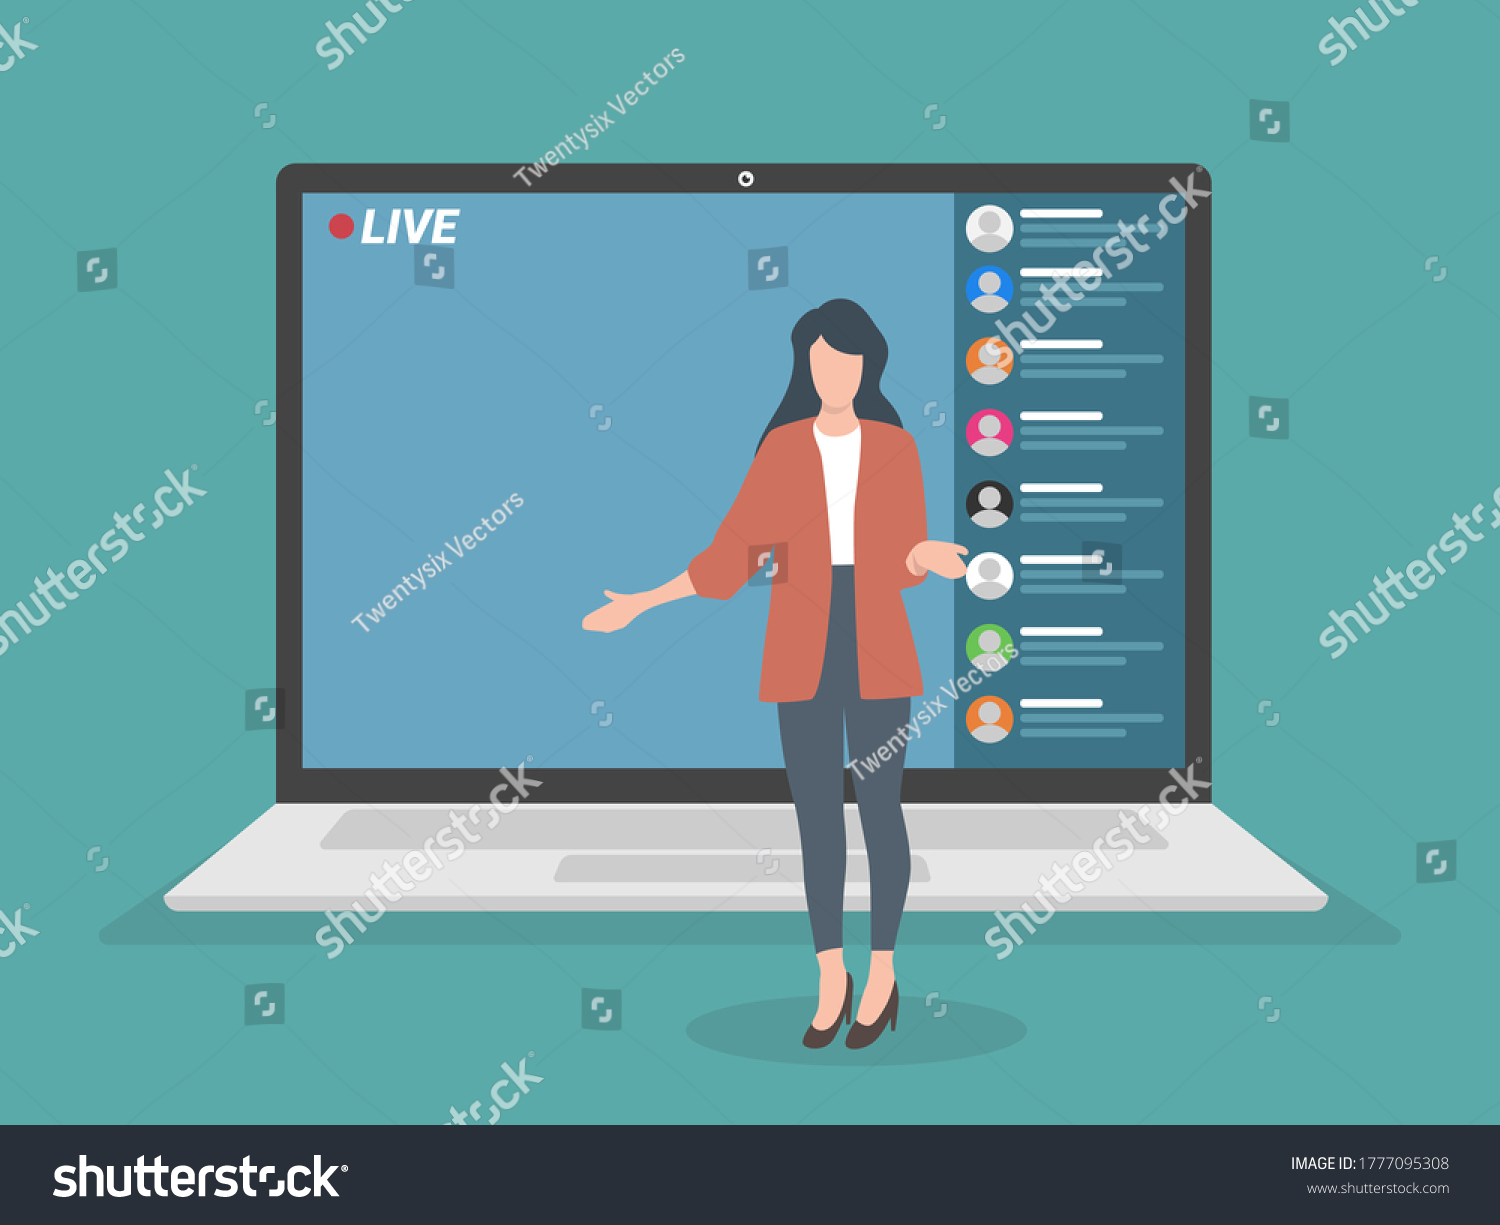 Live streaming event, young female performing in front of the laptop camera, remote activities, stay at home, business presentation, Video streaming, Video conferencing and online communication. #1777095308